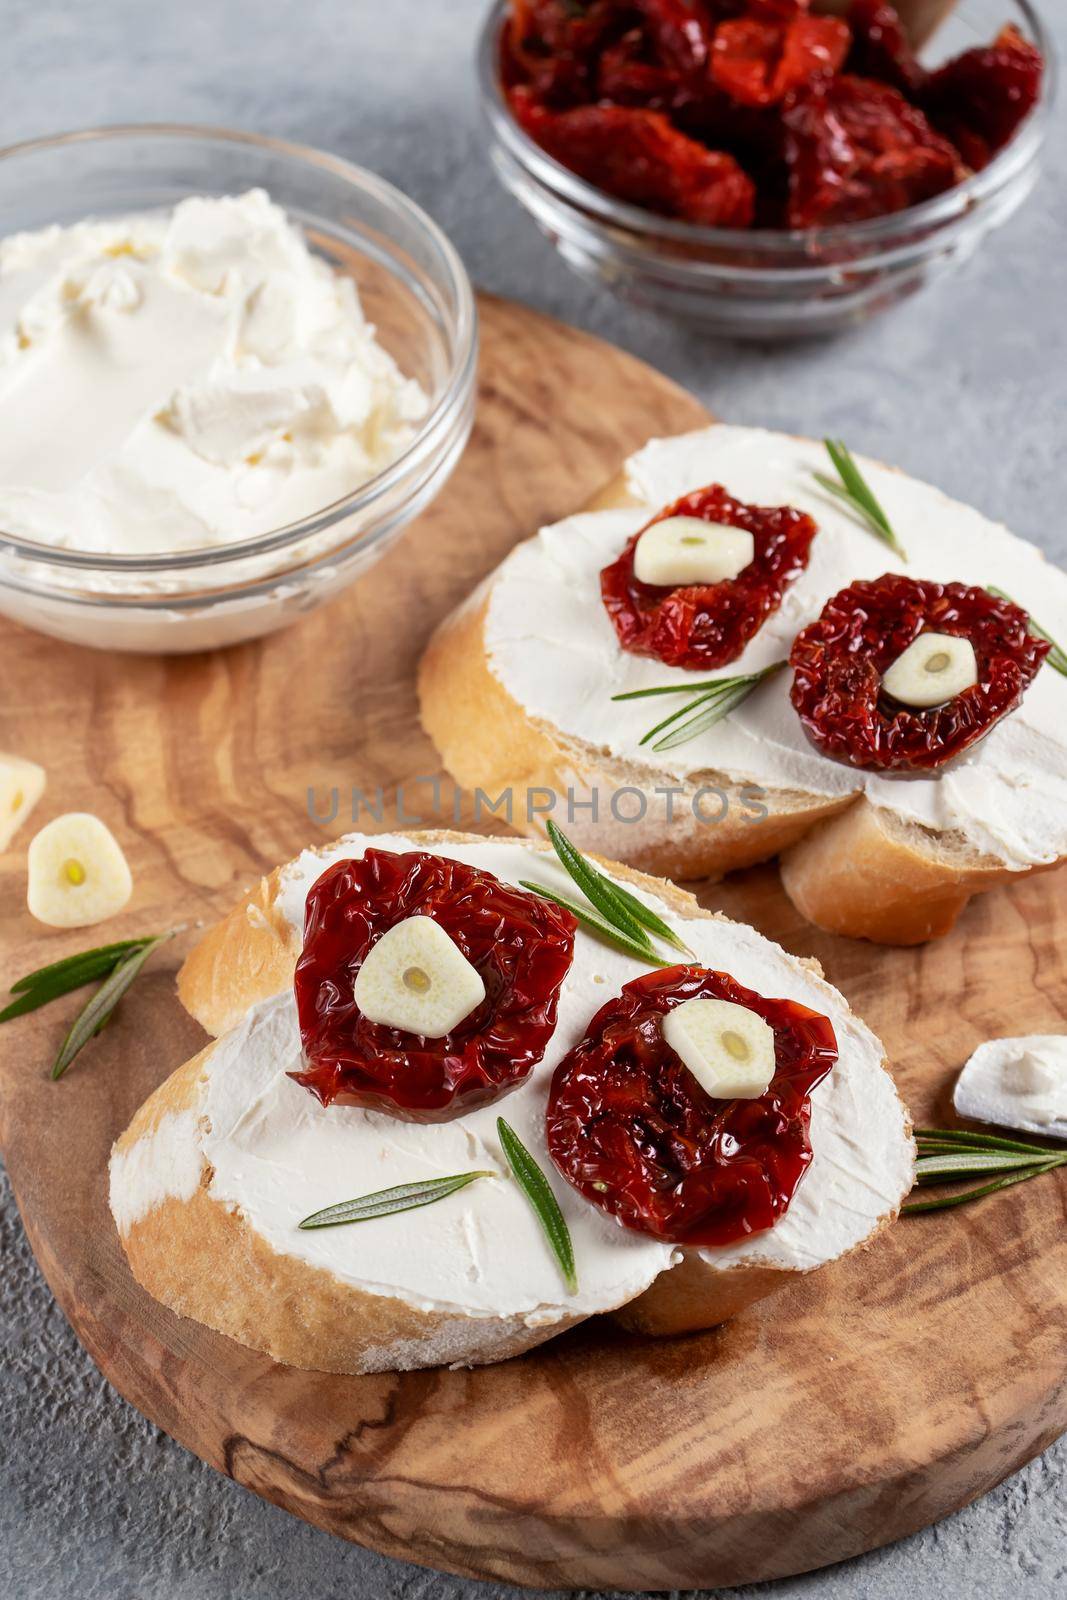 Homemade sandwiches with cream cheese and sun-dried tomatoes on a wooden board of olive - delicious healthy breakfast, italian cuisine, vertical image, copy space.